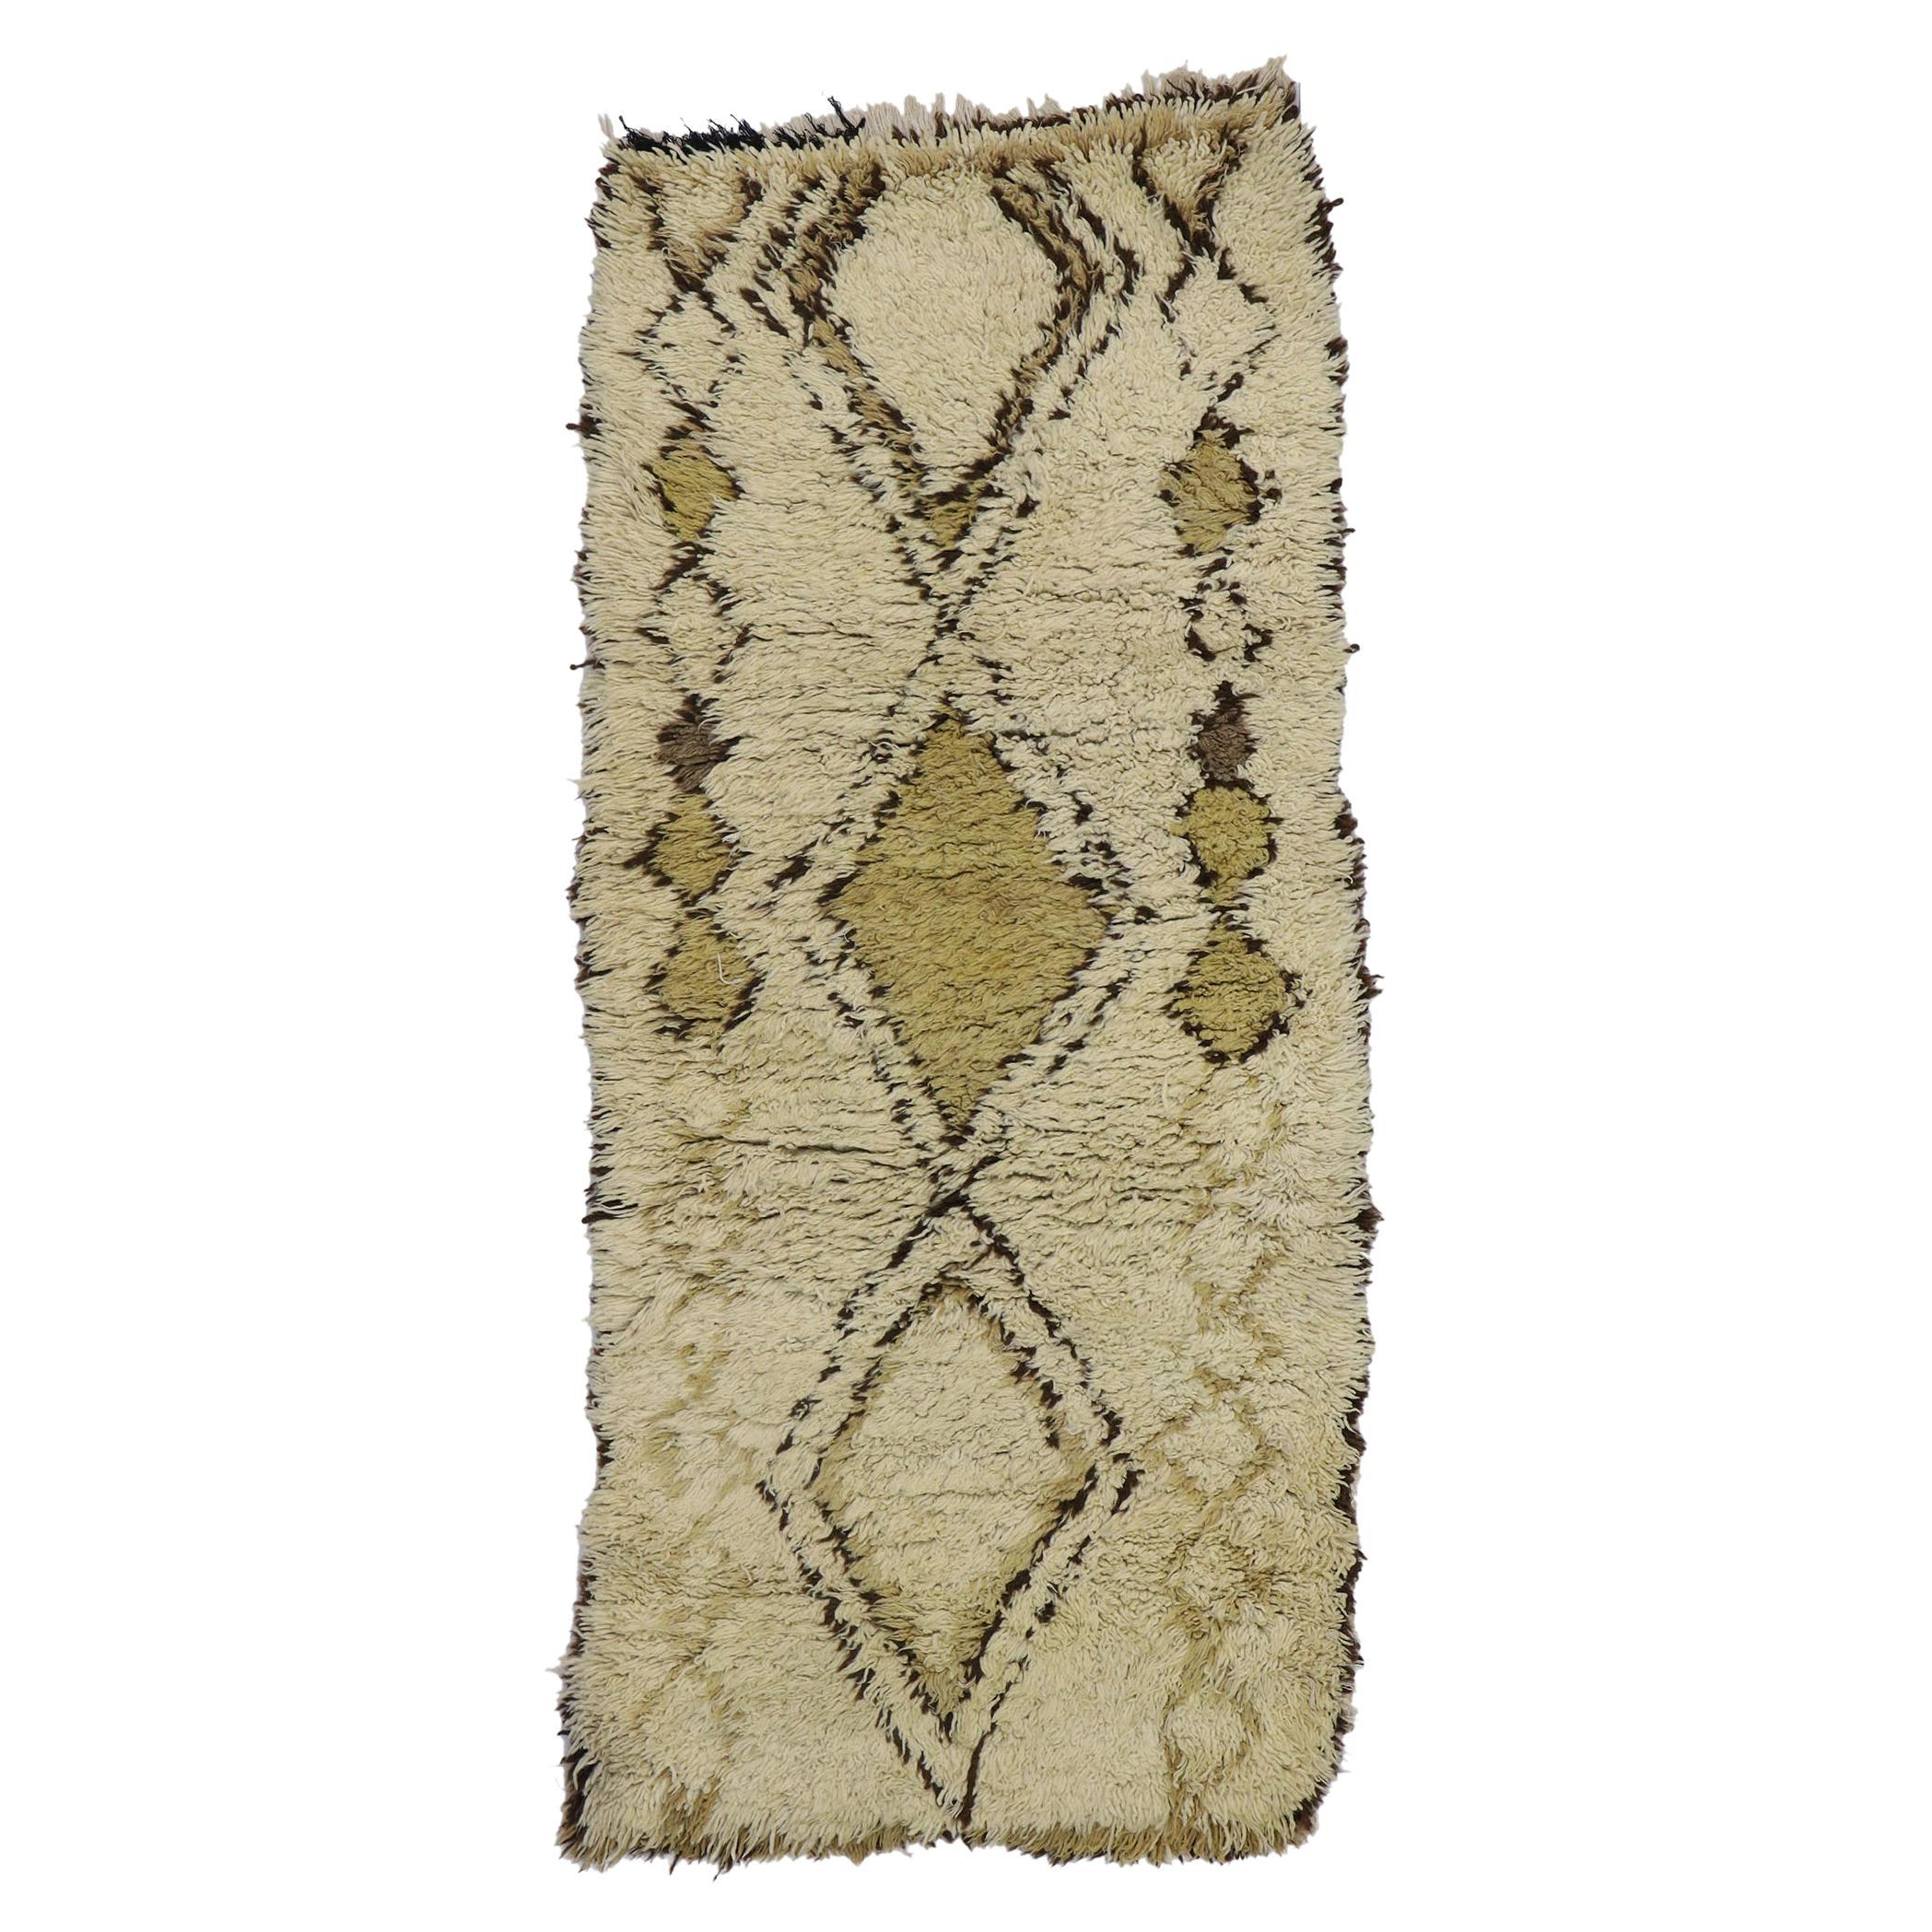 Small Vintage Moroccan Rug, Rustic Luxe Meets Rugged Beauty